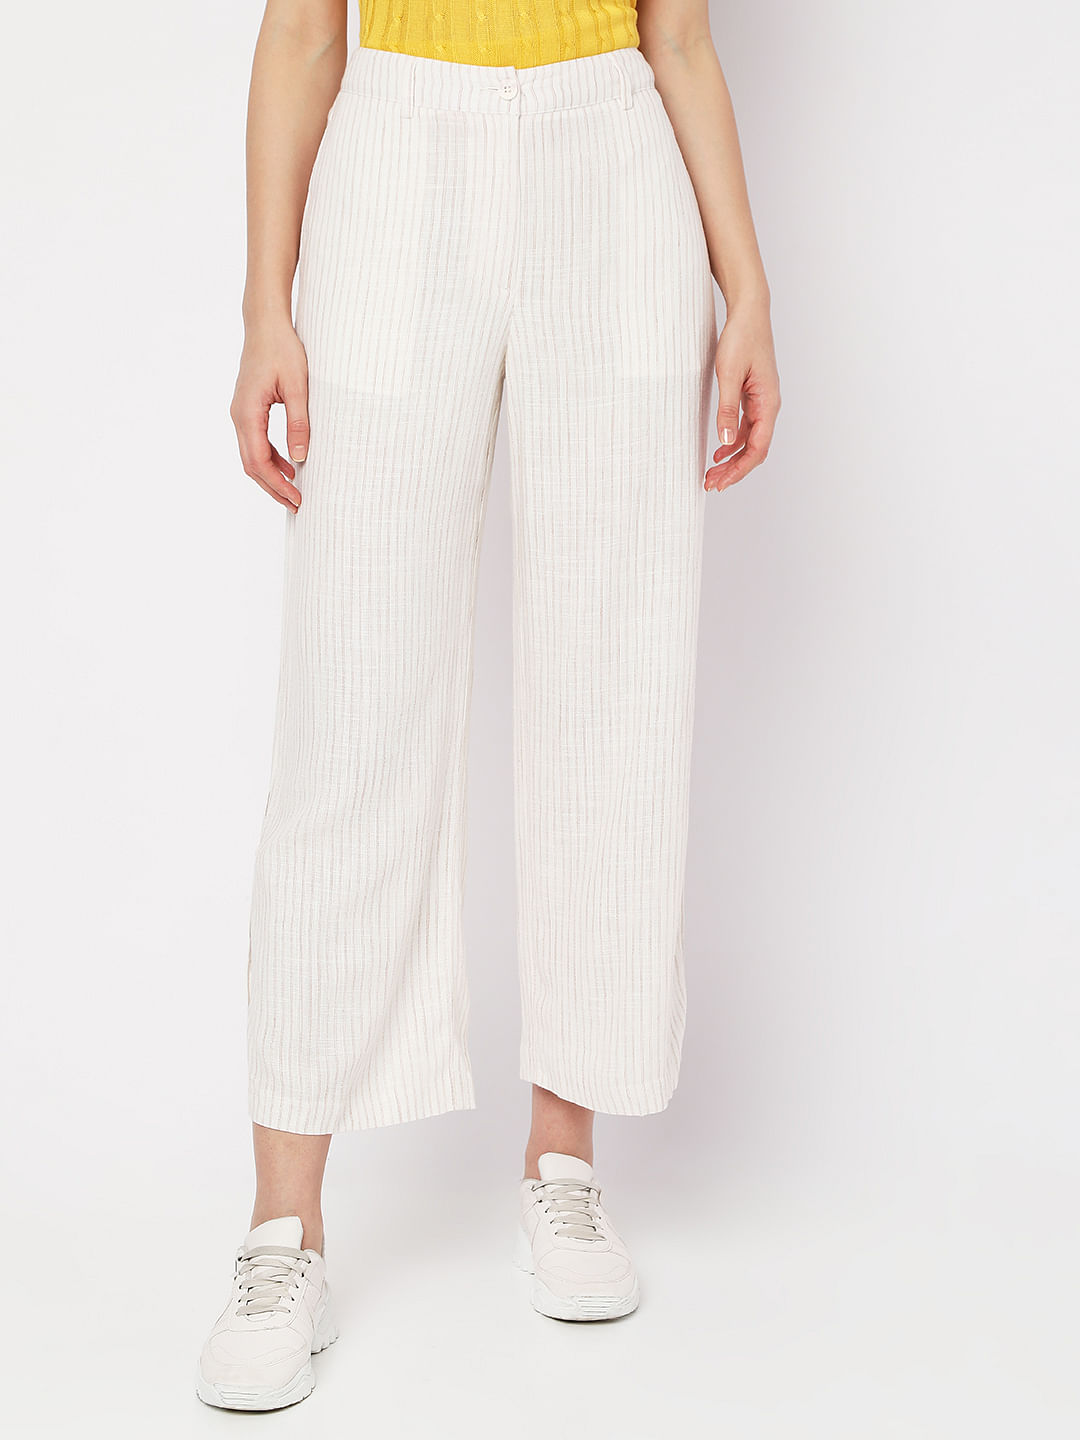 Buy Linen Blend Drawstring Trousers from Next India